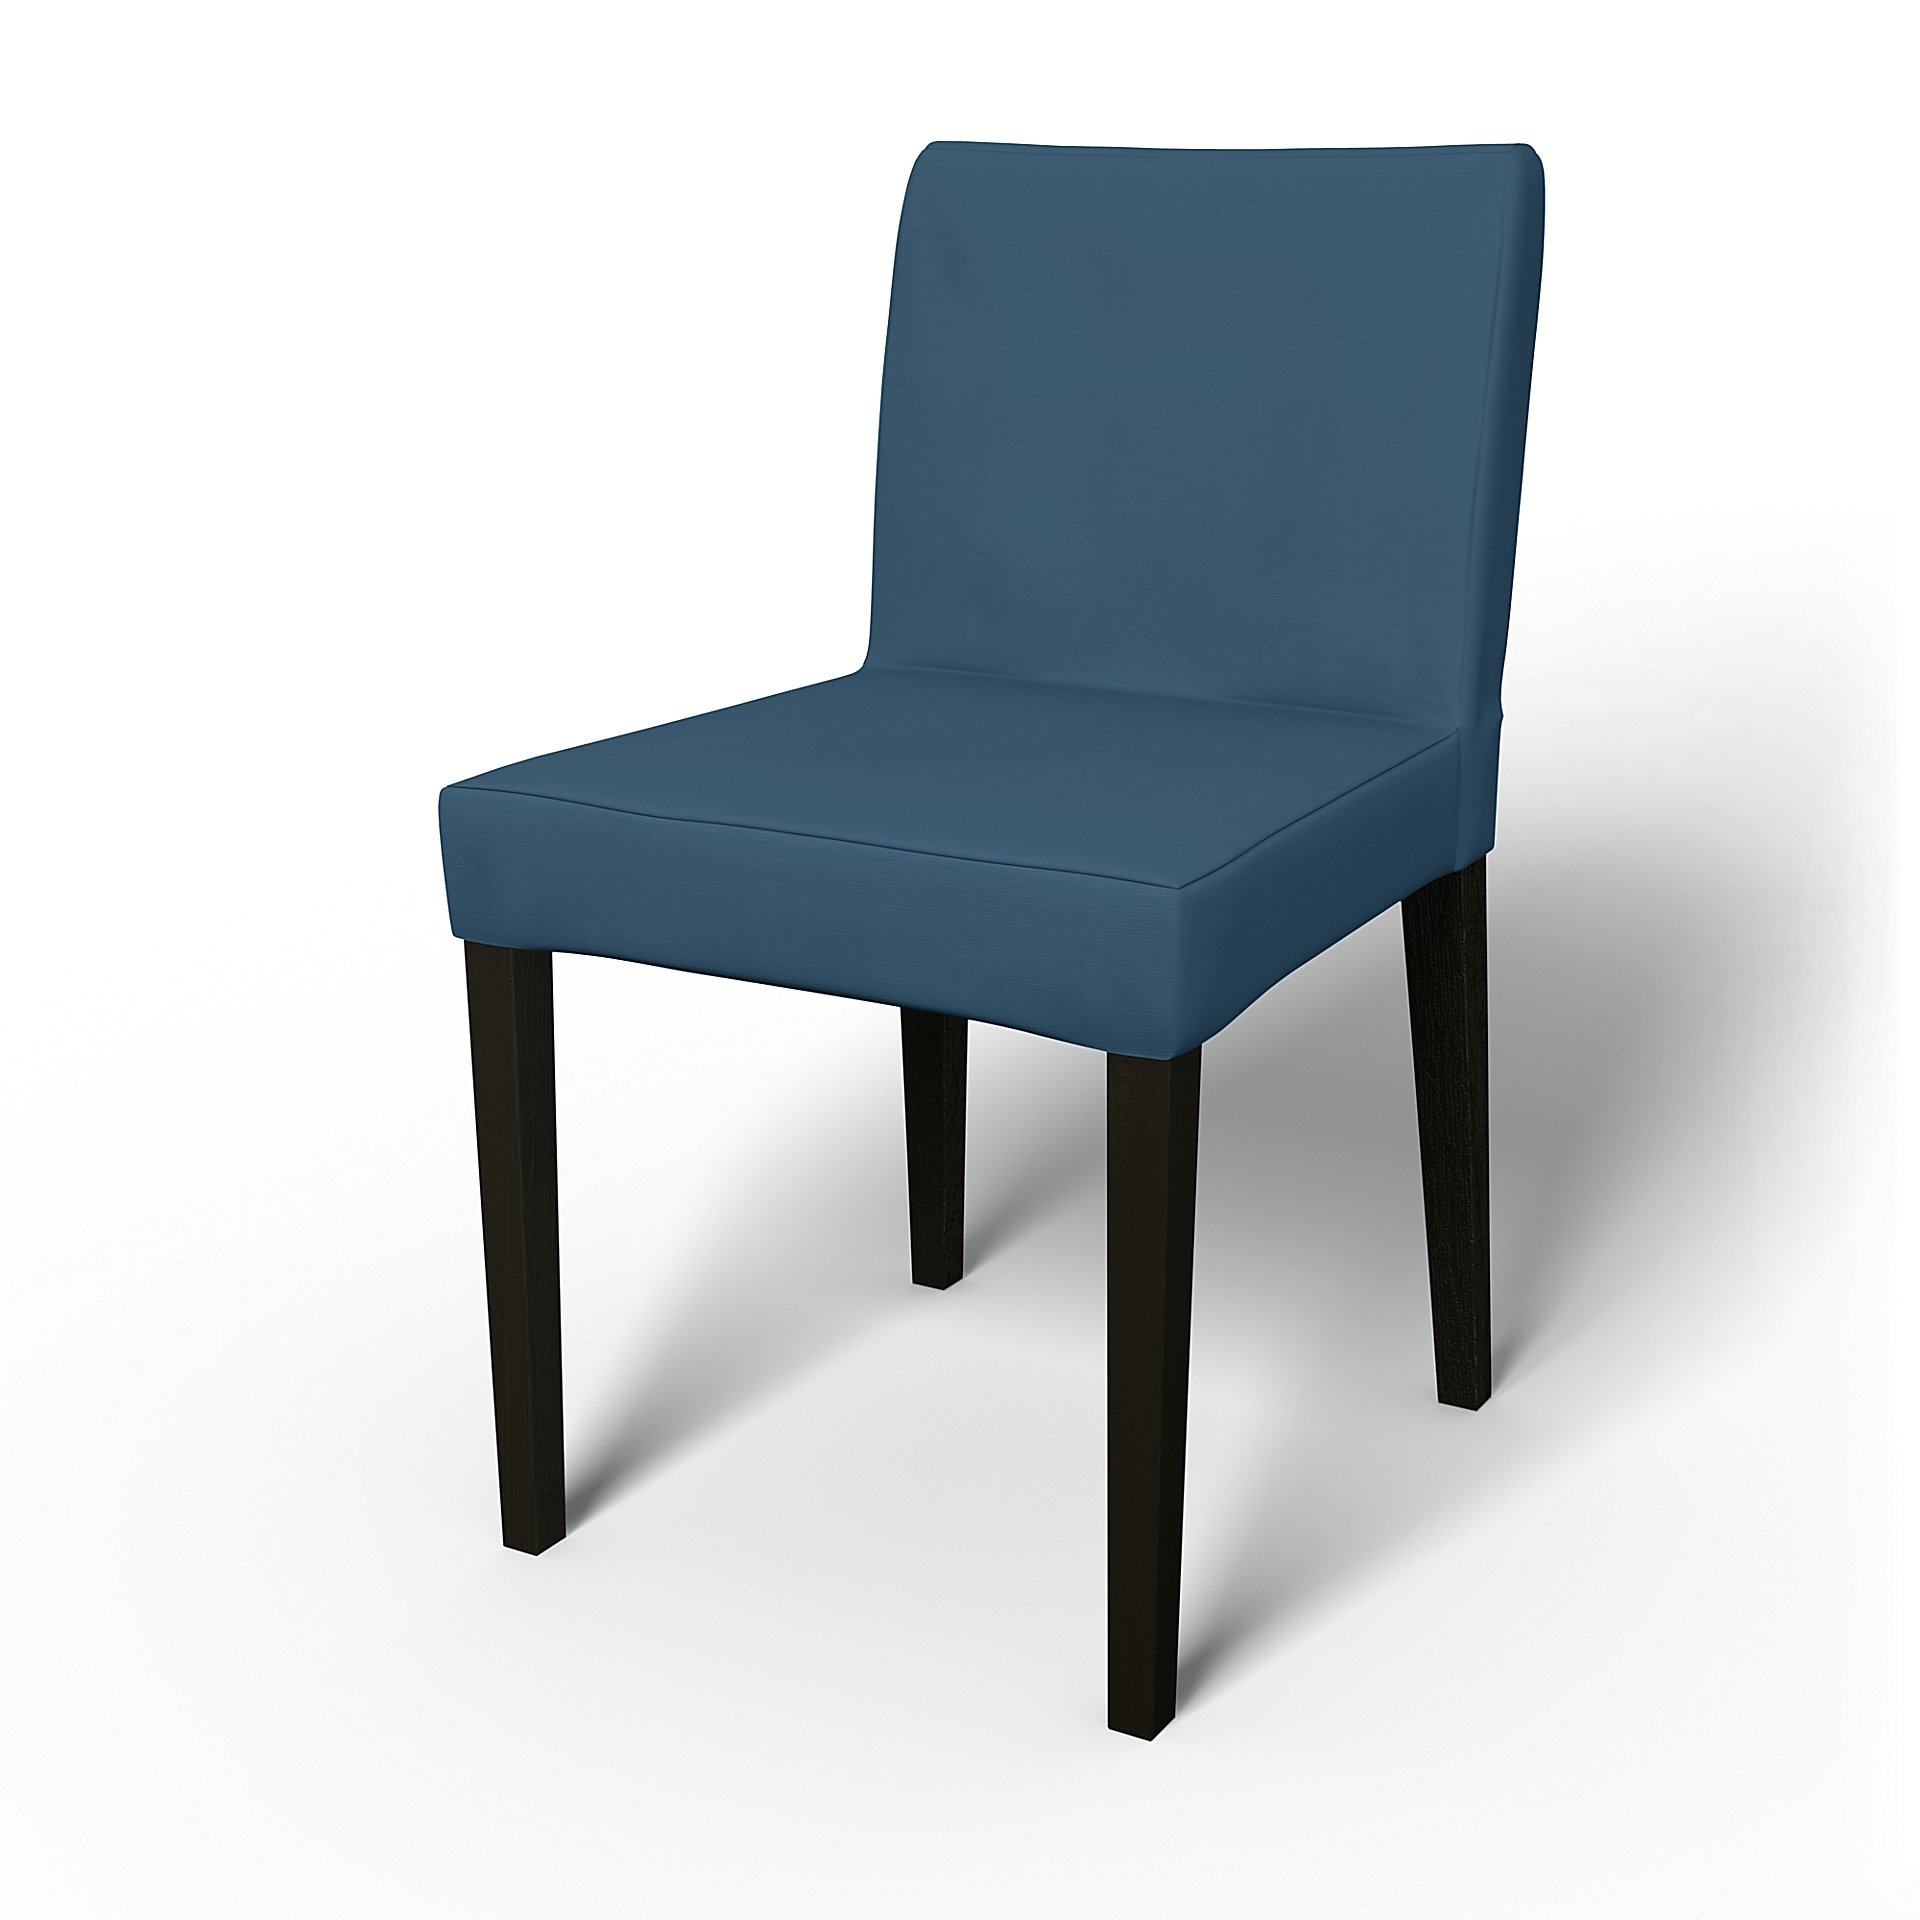 IKEA - Henrik Dining Chair Cover, Real Teal, Cotton - Bemz